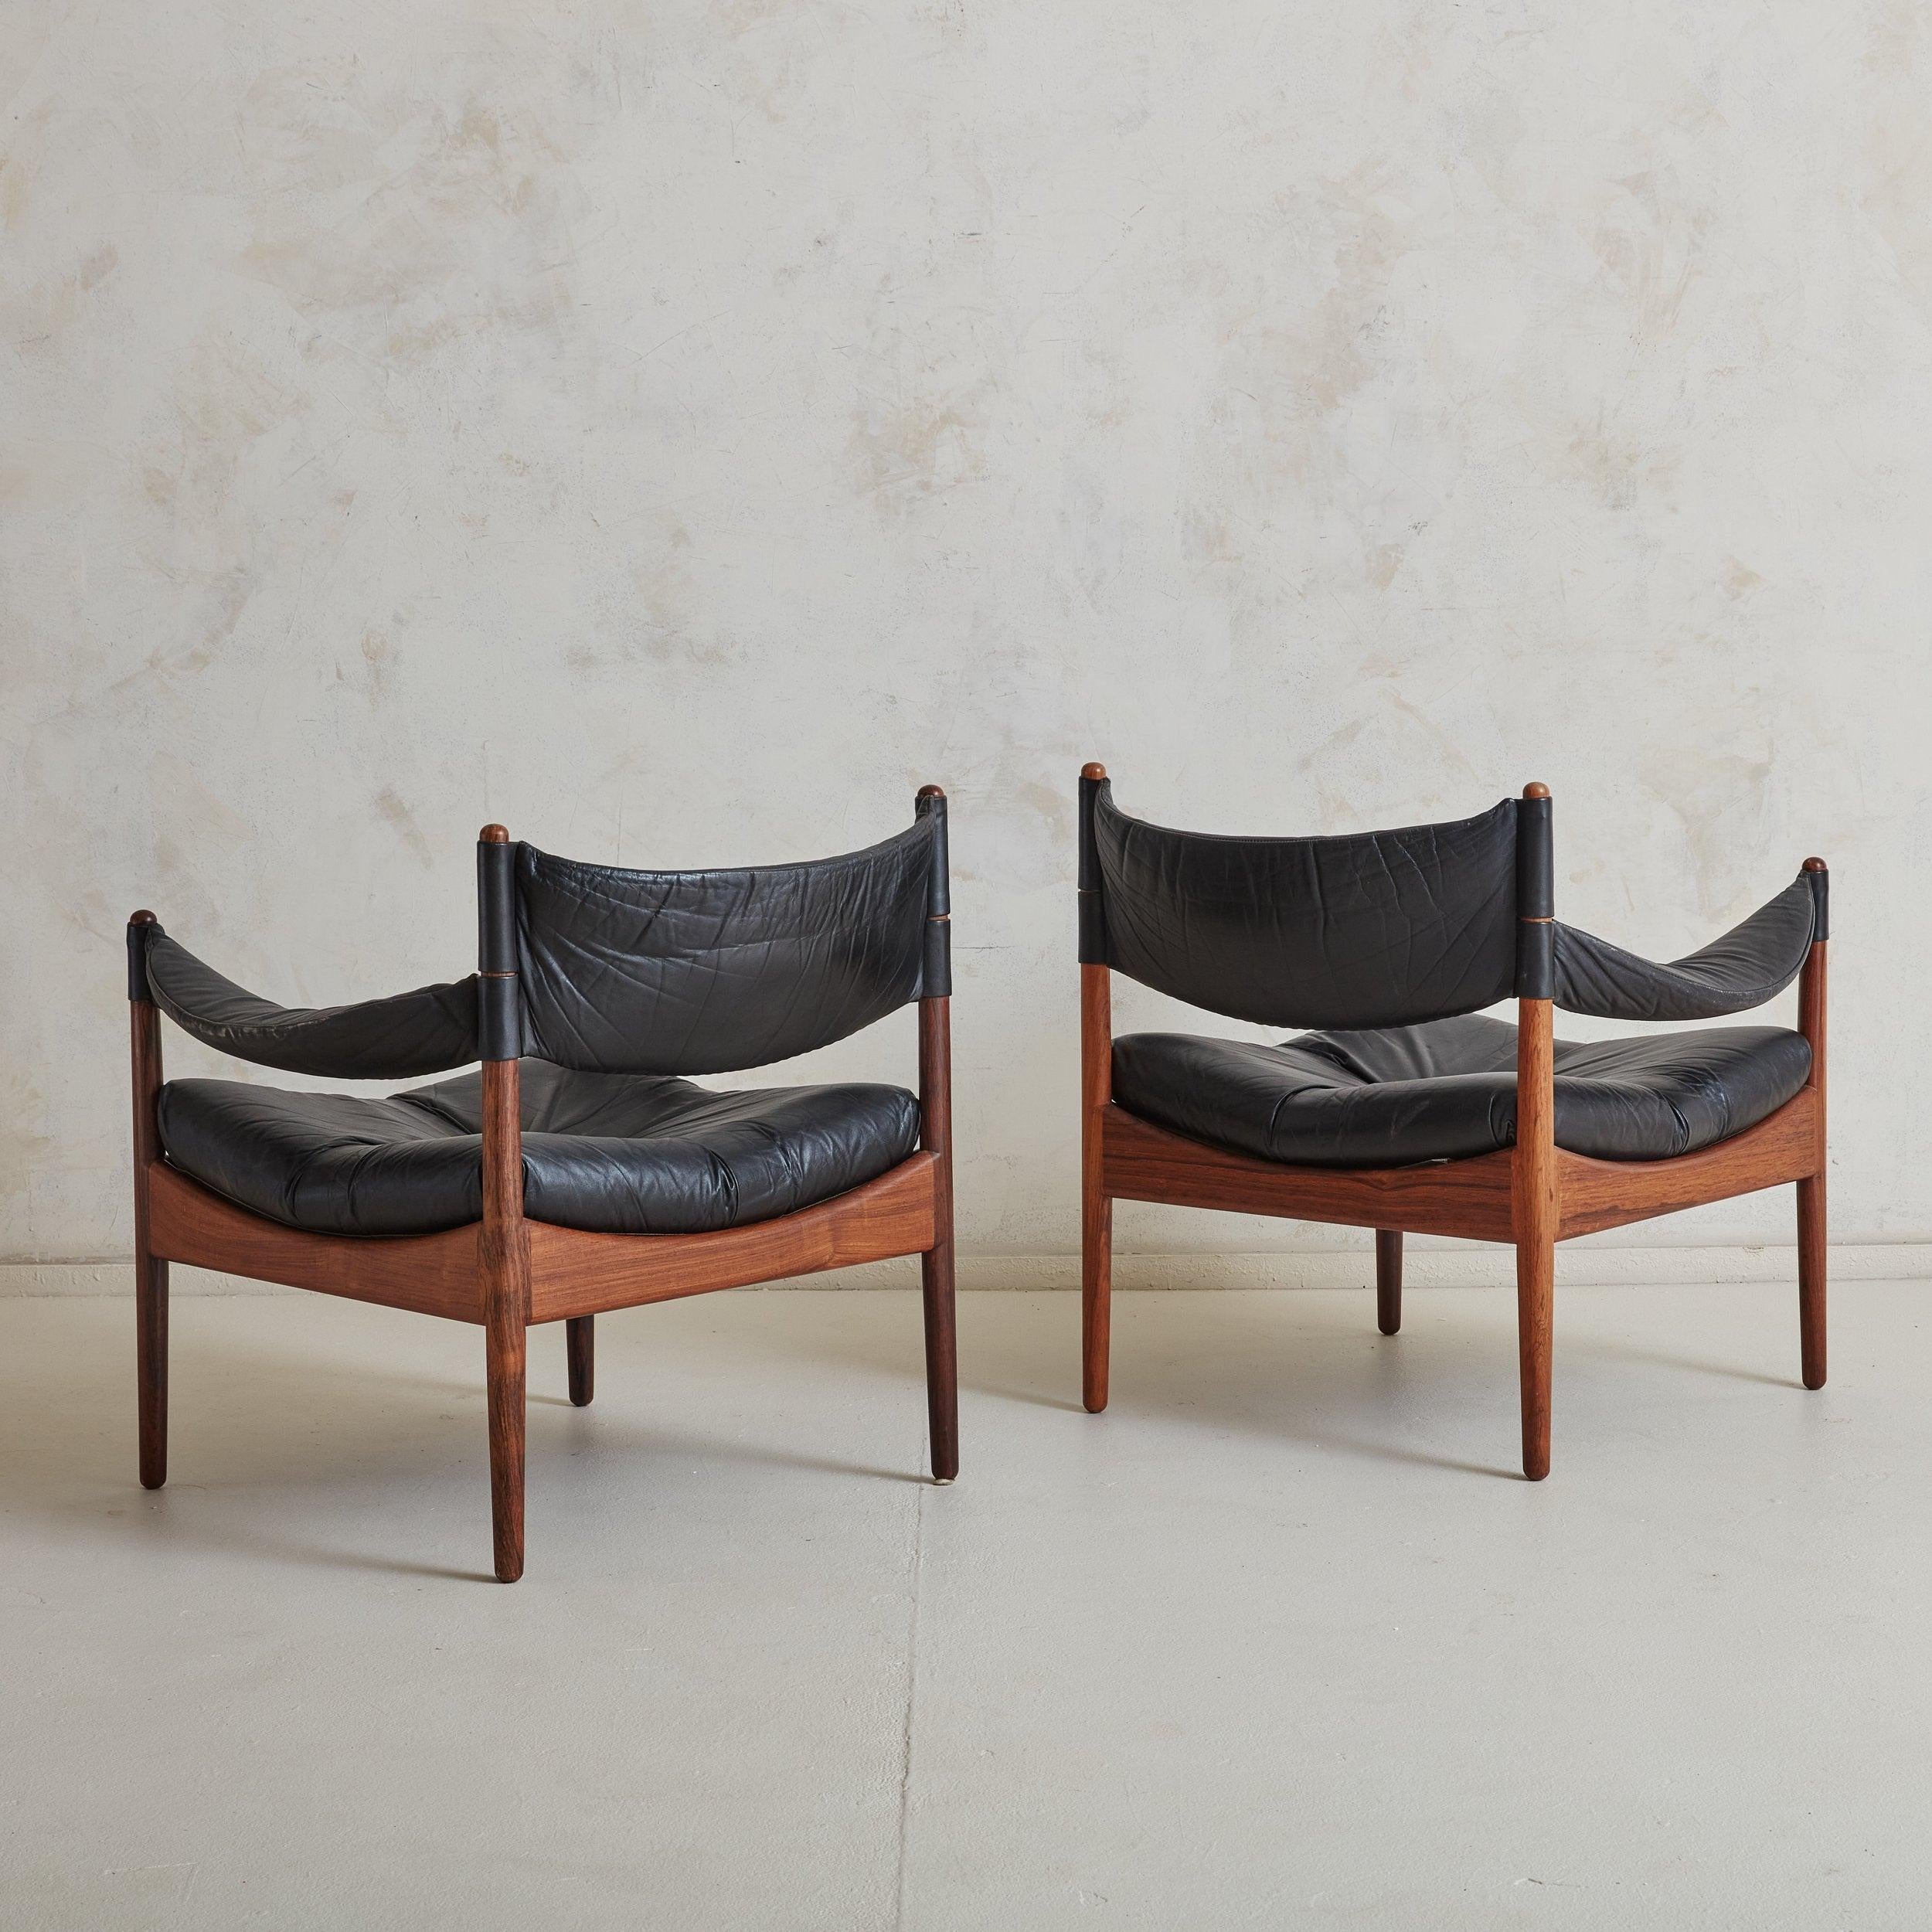 Scandinavian Modern Set of 2 Leather Chairs with Table by Kristian Vedel for Willadsen Møbelfabrik For Sale